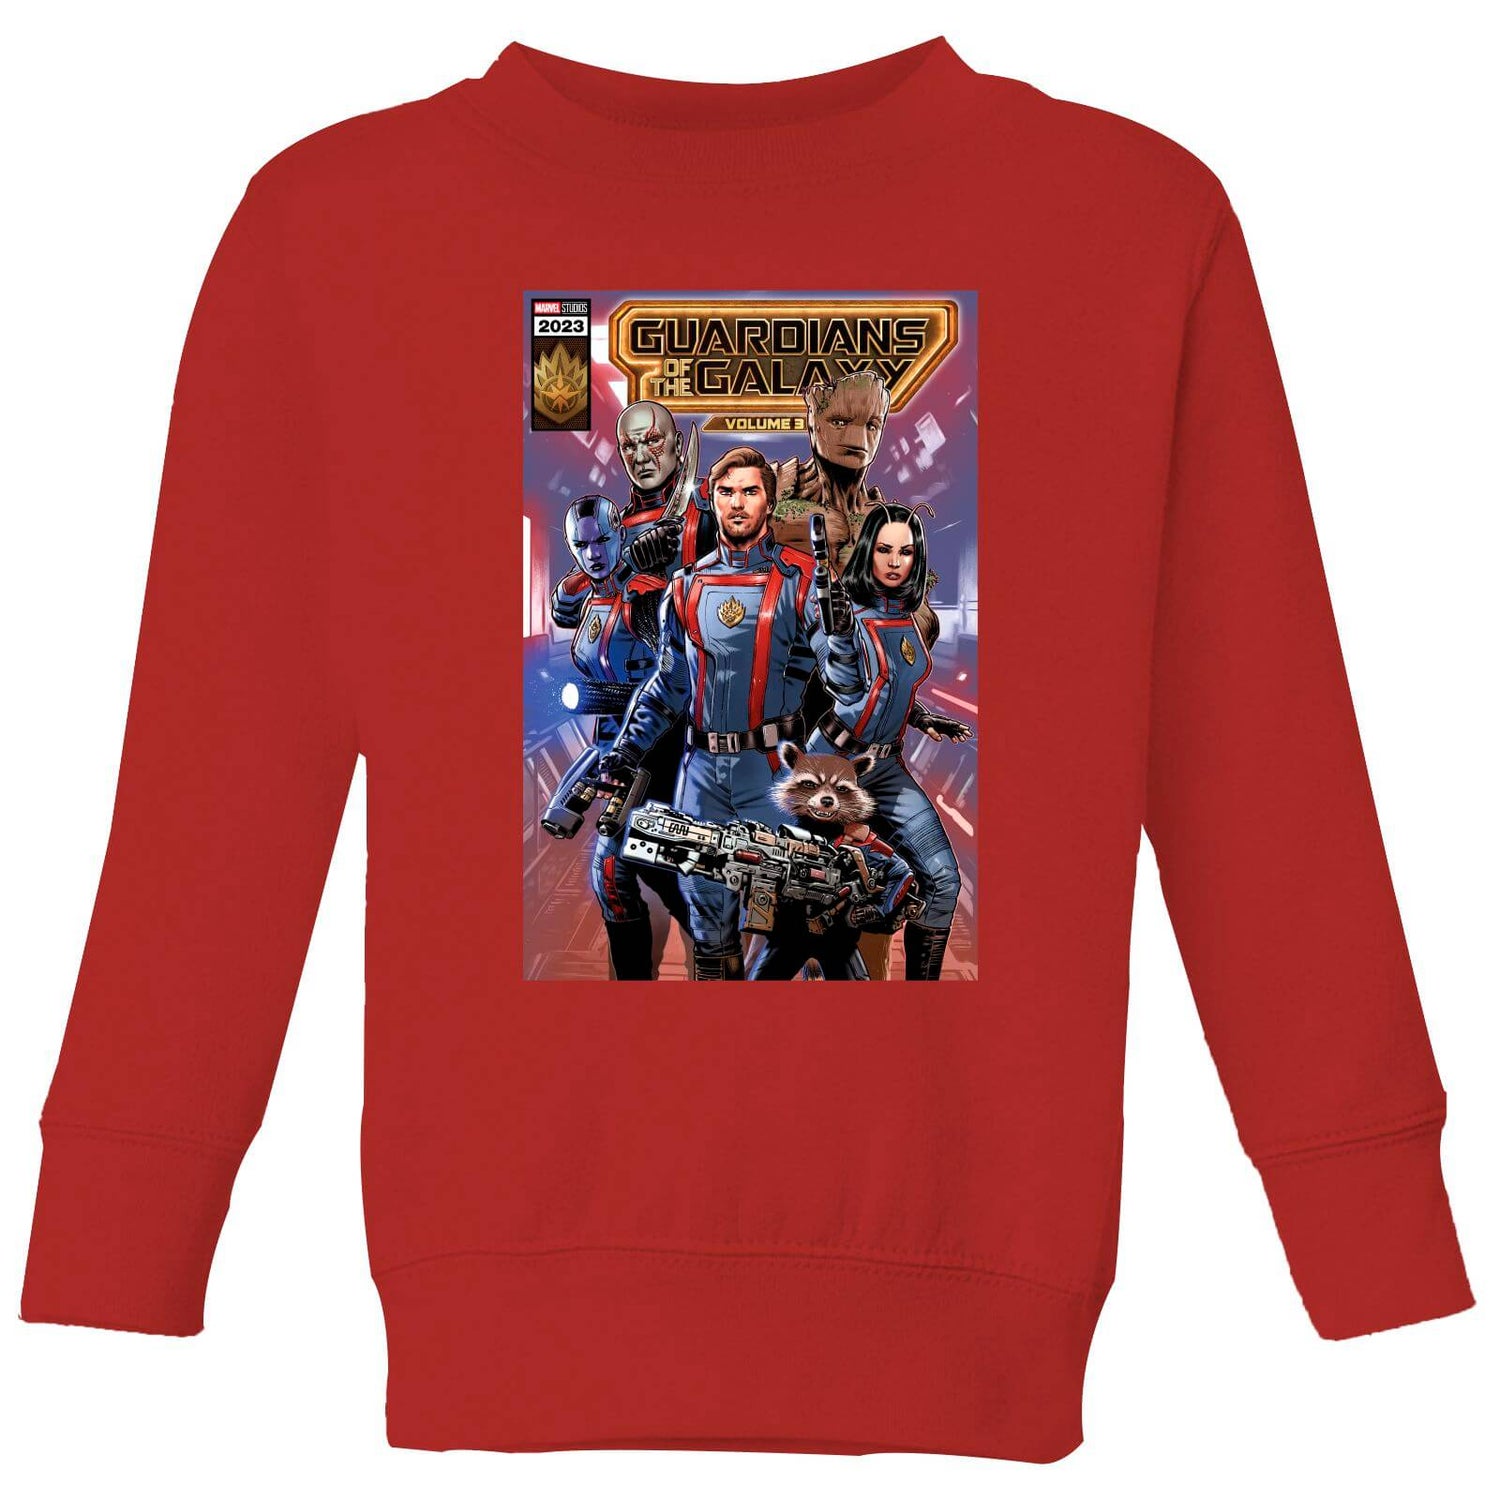 Guardians of the Galaxy Photo Comic Cover Kids' Sweatshirt - Red